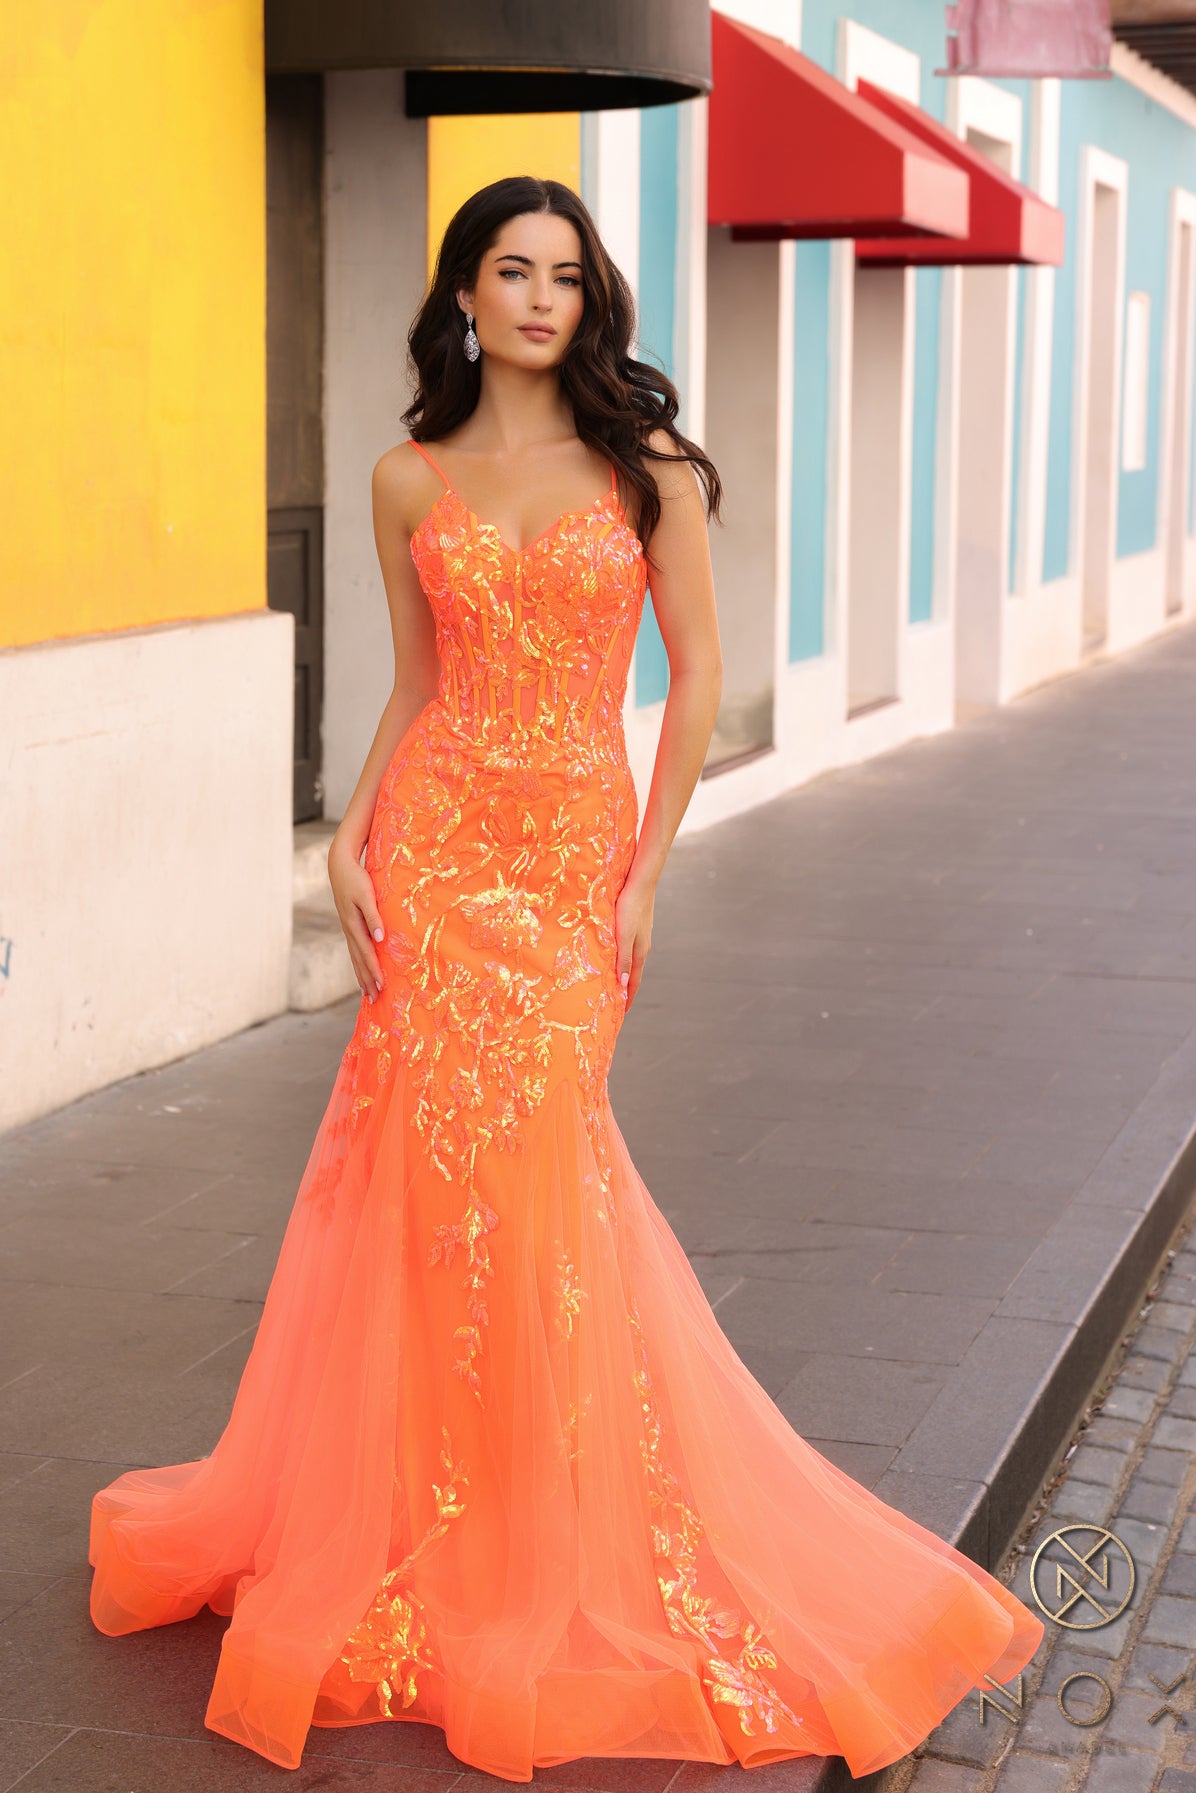 Elevate your prom or pageant look with the Nox Anabel Q1390 Prom Dress. Featuring a long sequin body with a sheer corset and mermaid silhouette, this dress will have you shining all night. Stand out in vibrant neon while feeling confident and elegant.  Sizes: 0-16  Colors: Neon Green, Neon Orange, Coral Fuchsia, Ocean Blue